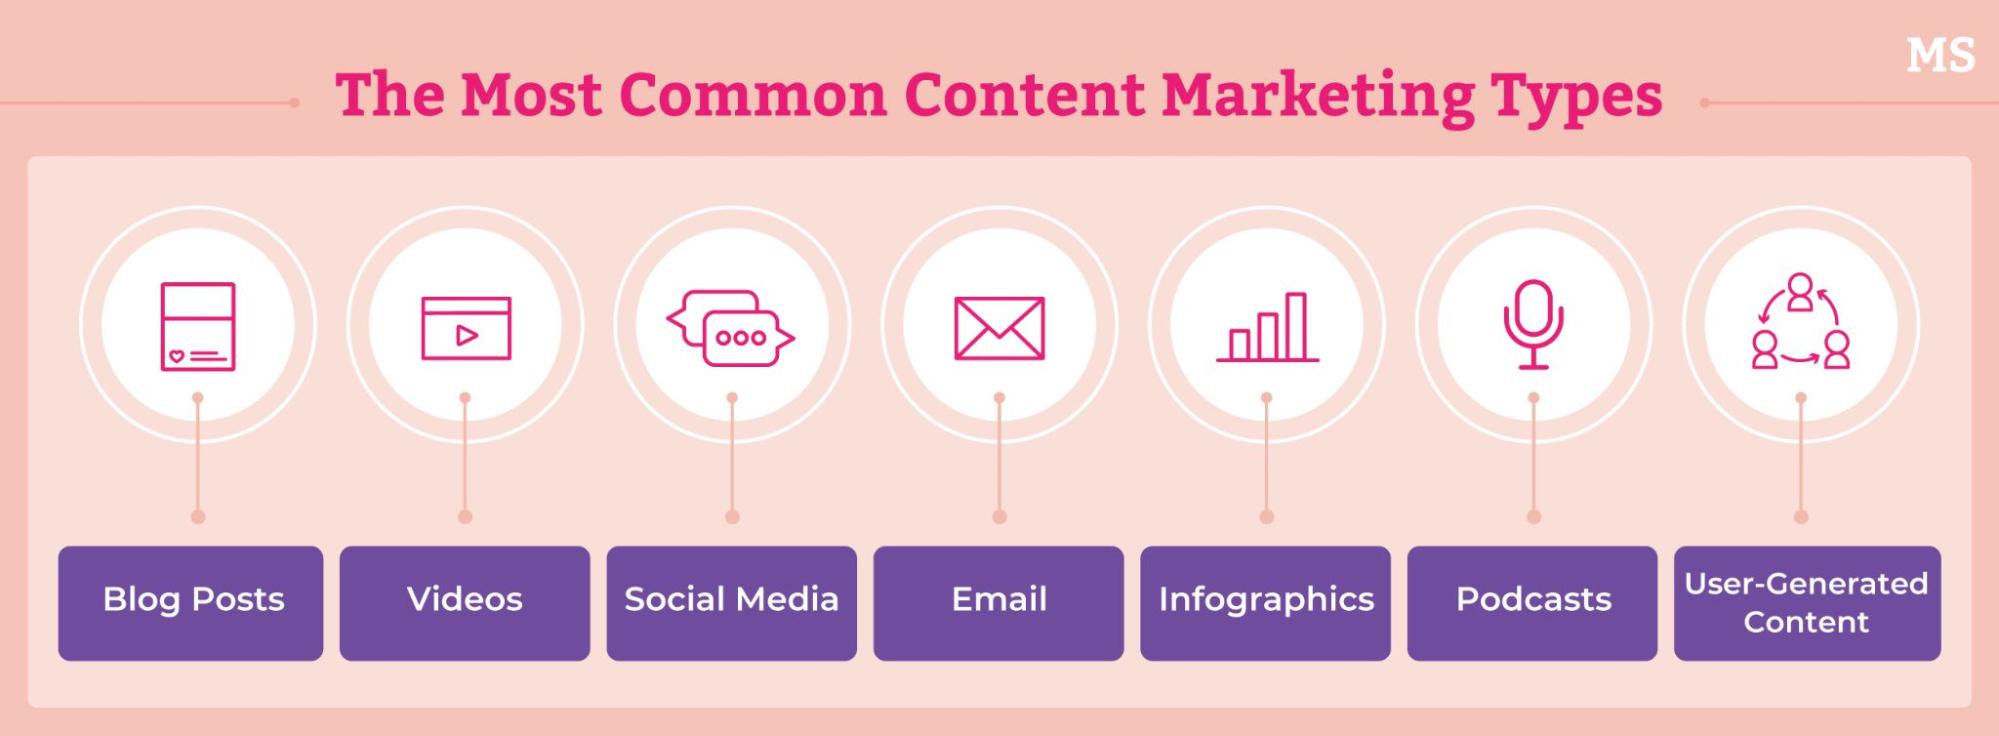 the most common content marketing types: blog posts, videos, social media, email, infographics, podcasts, user-generated content